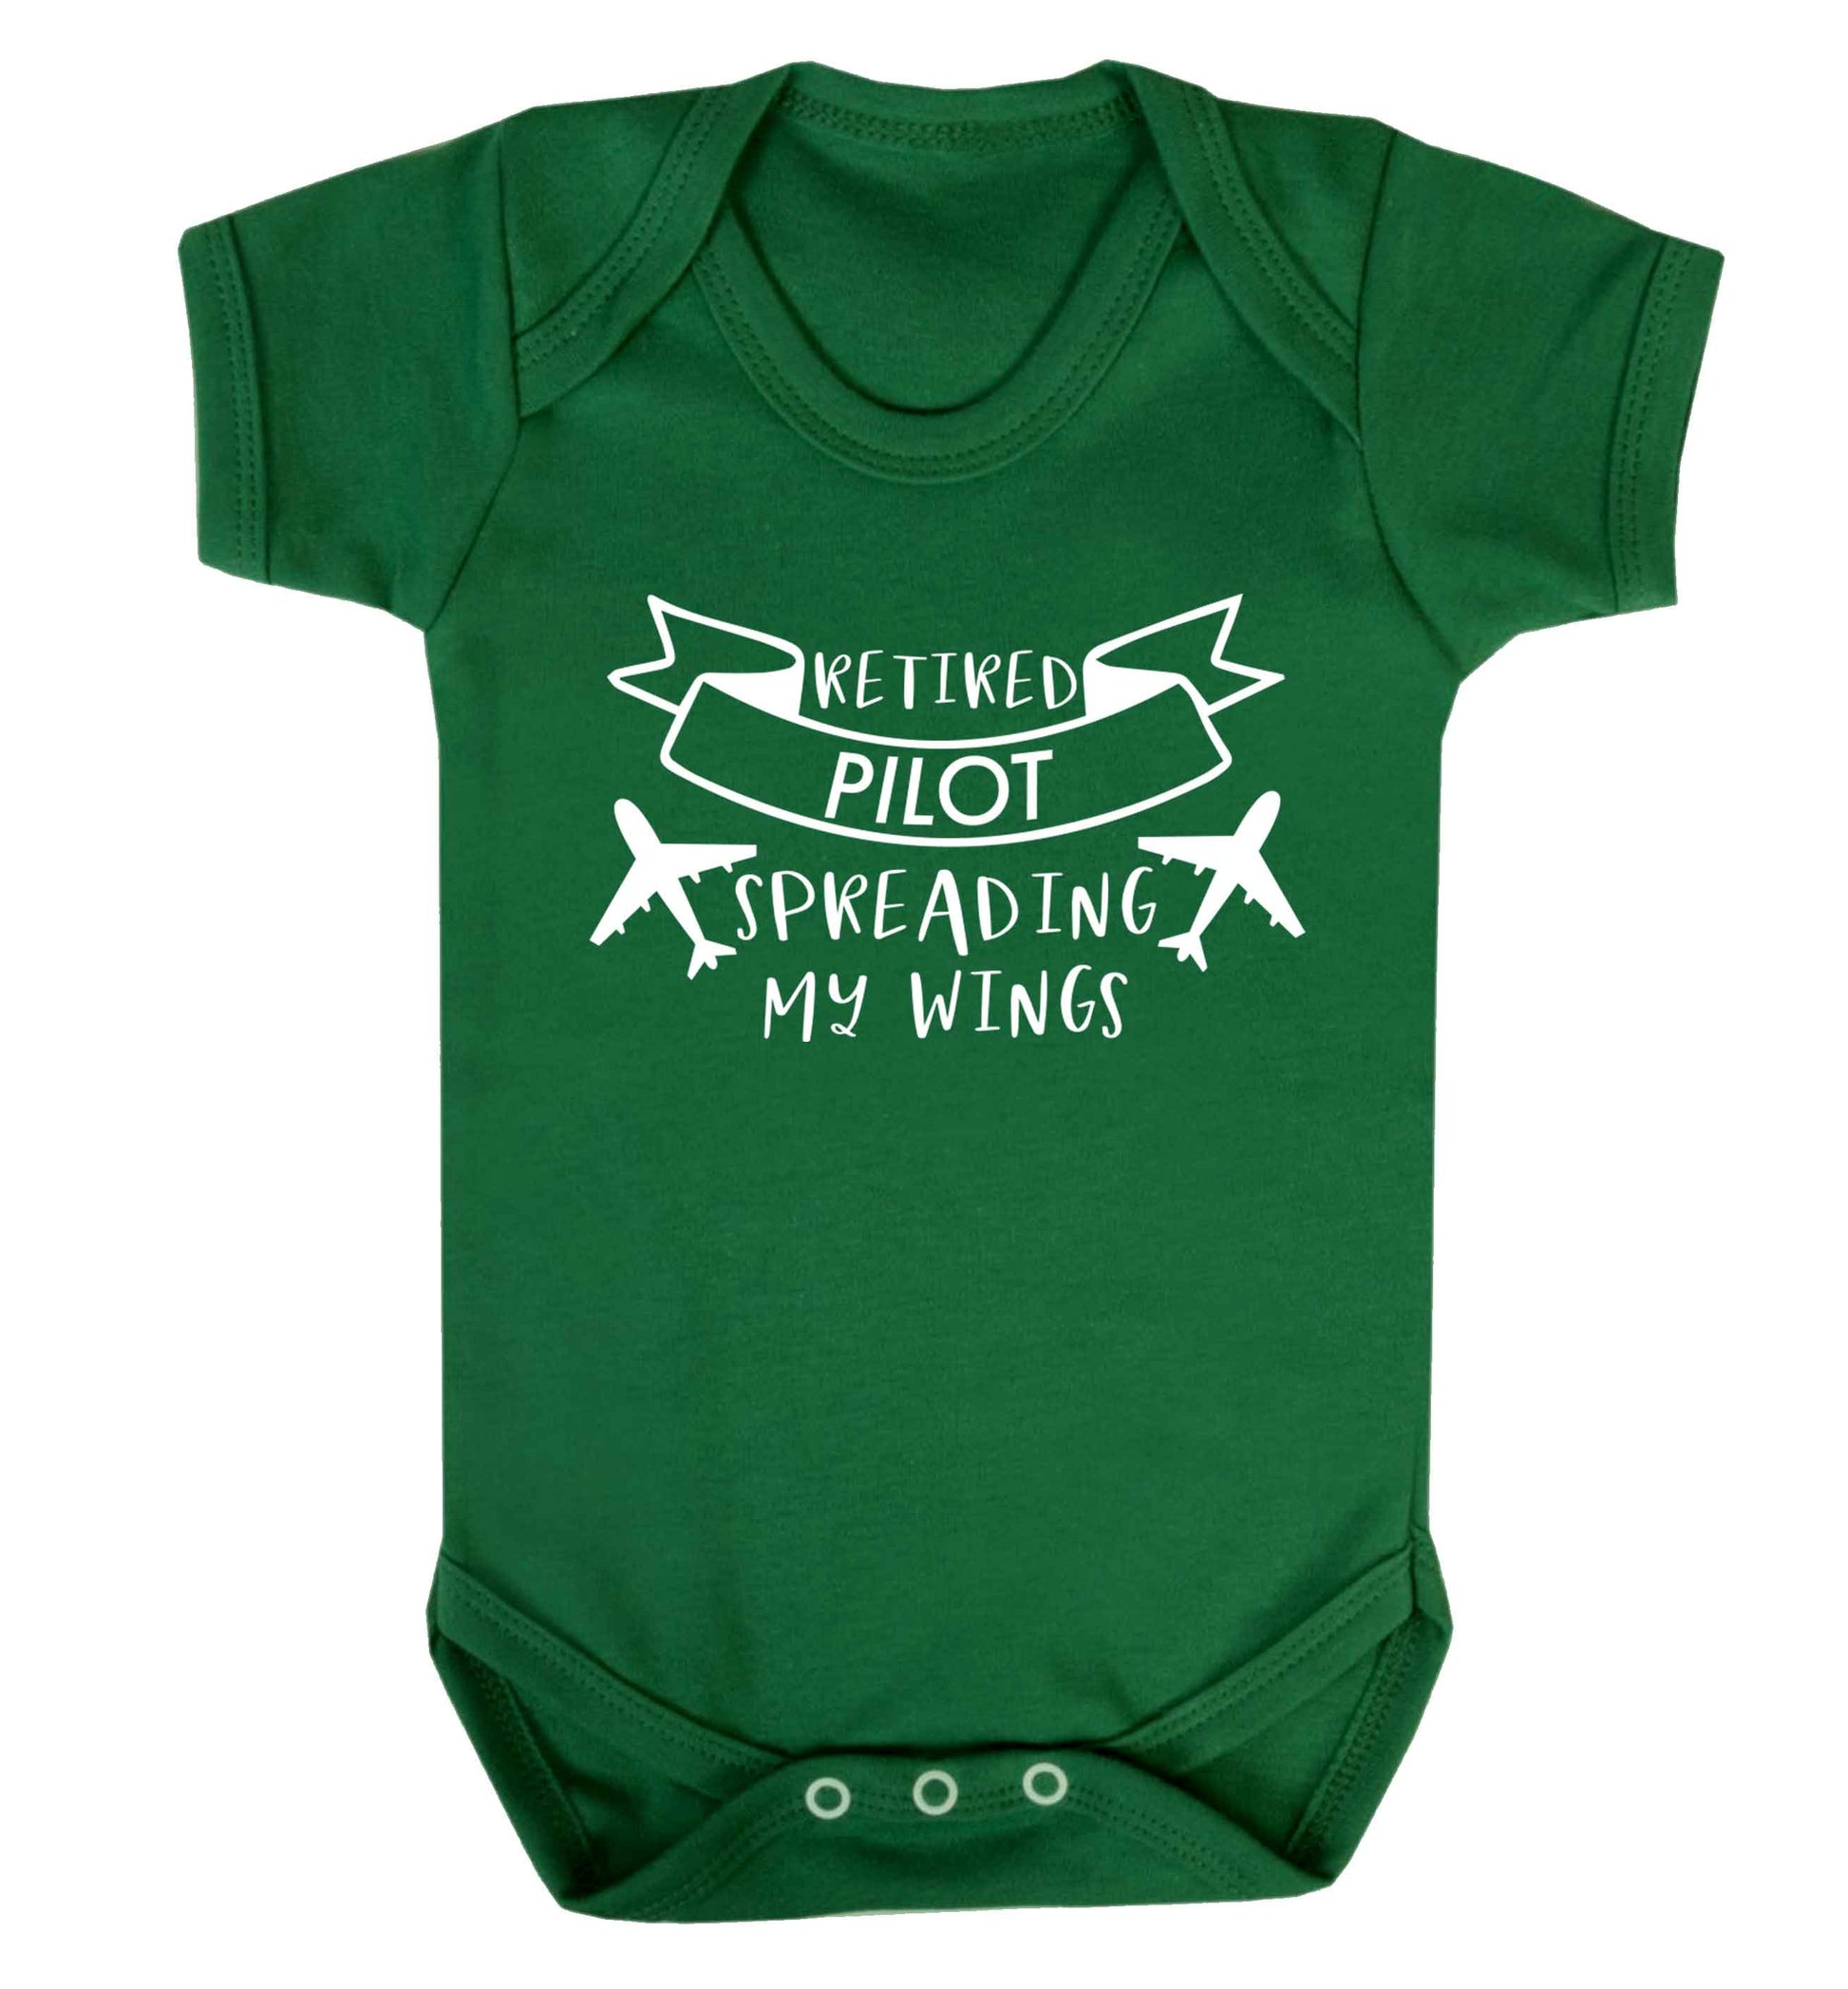 Retired pilot spreading my wings Baby Vest green 18-24 months